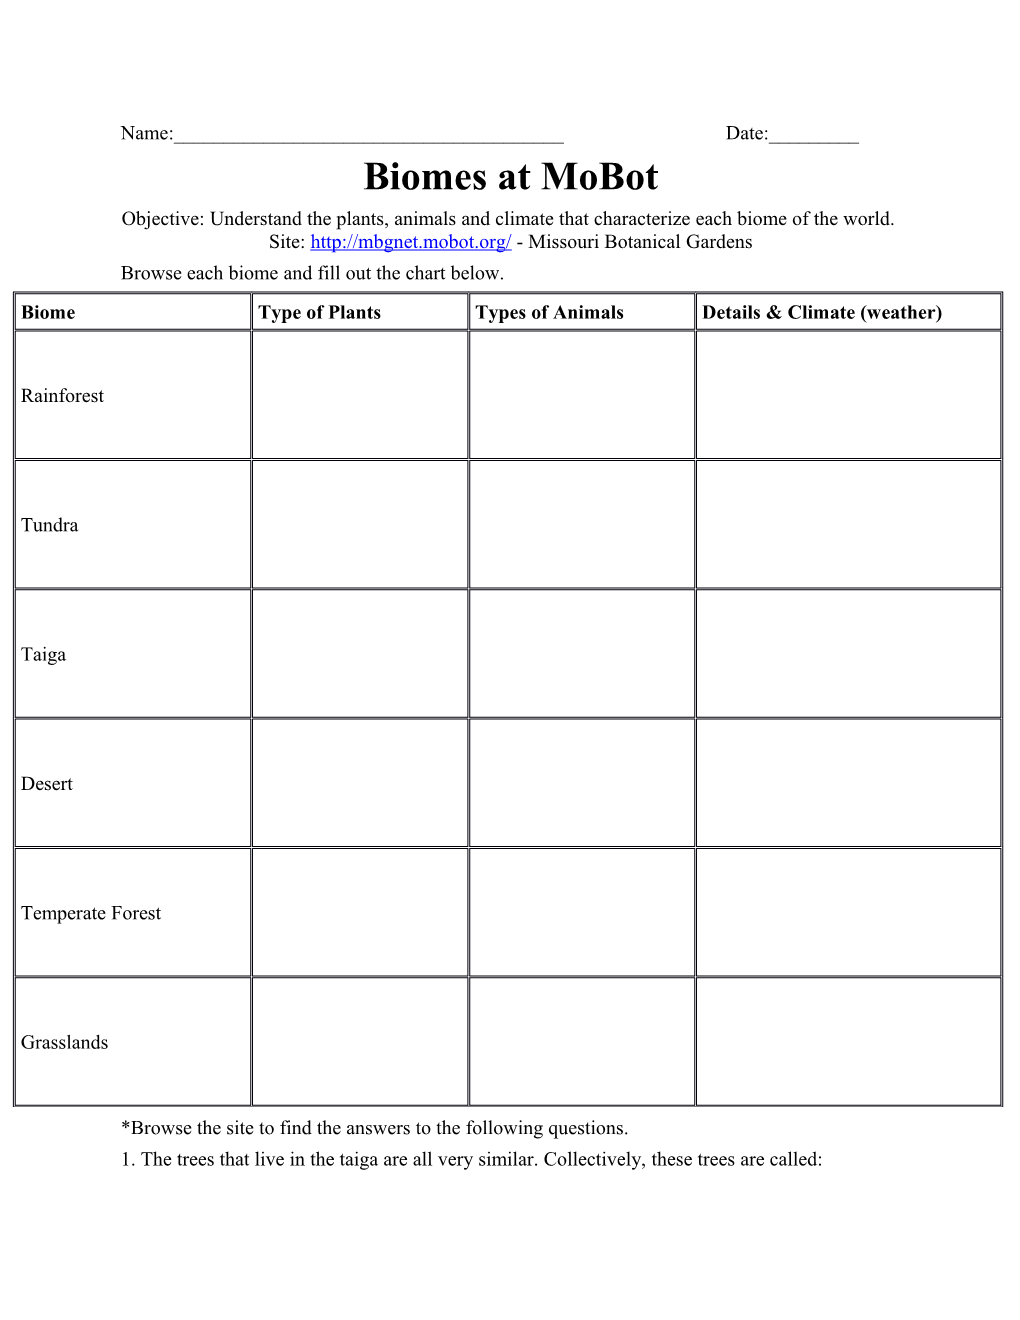 Browse Each Biome and Fill out the Chart Below